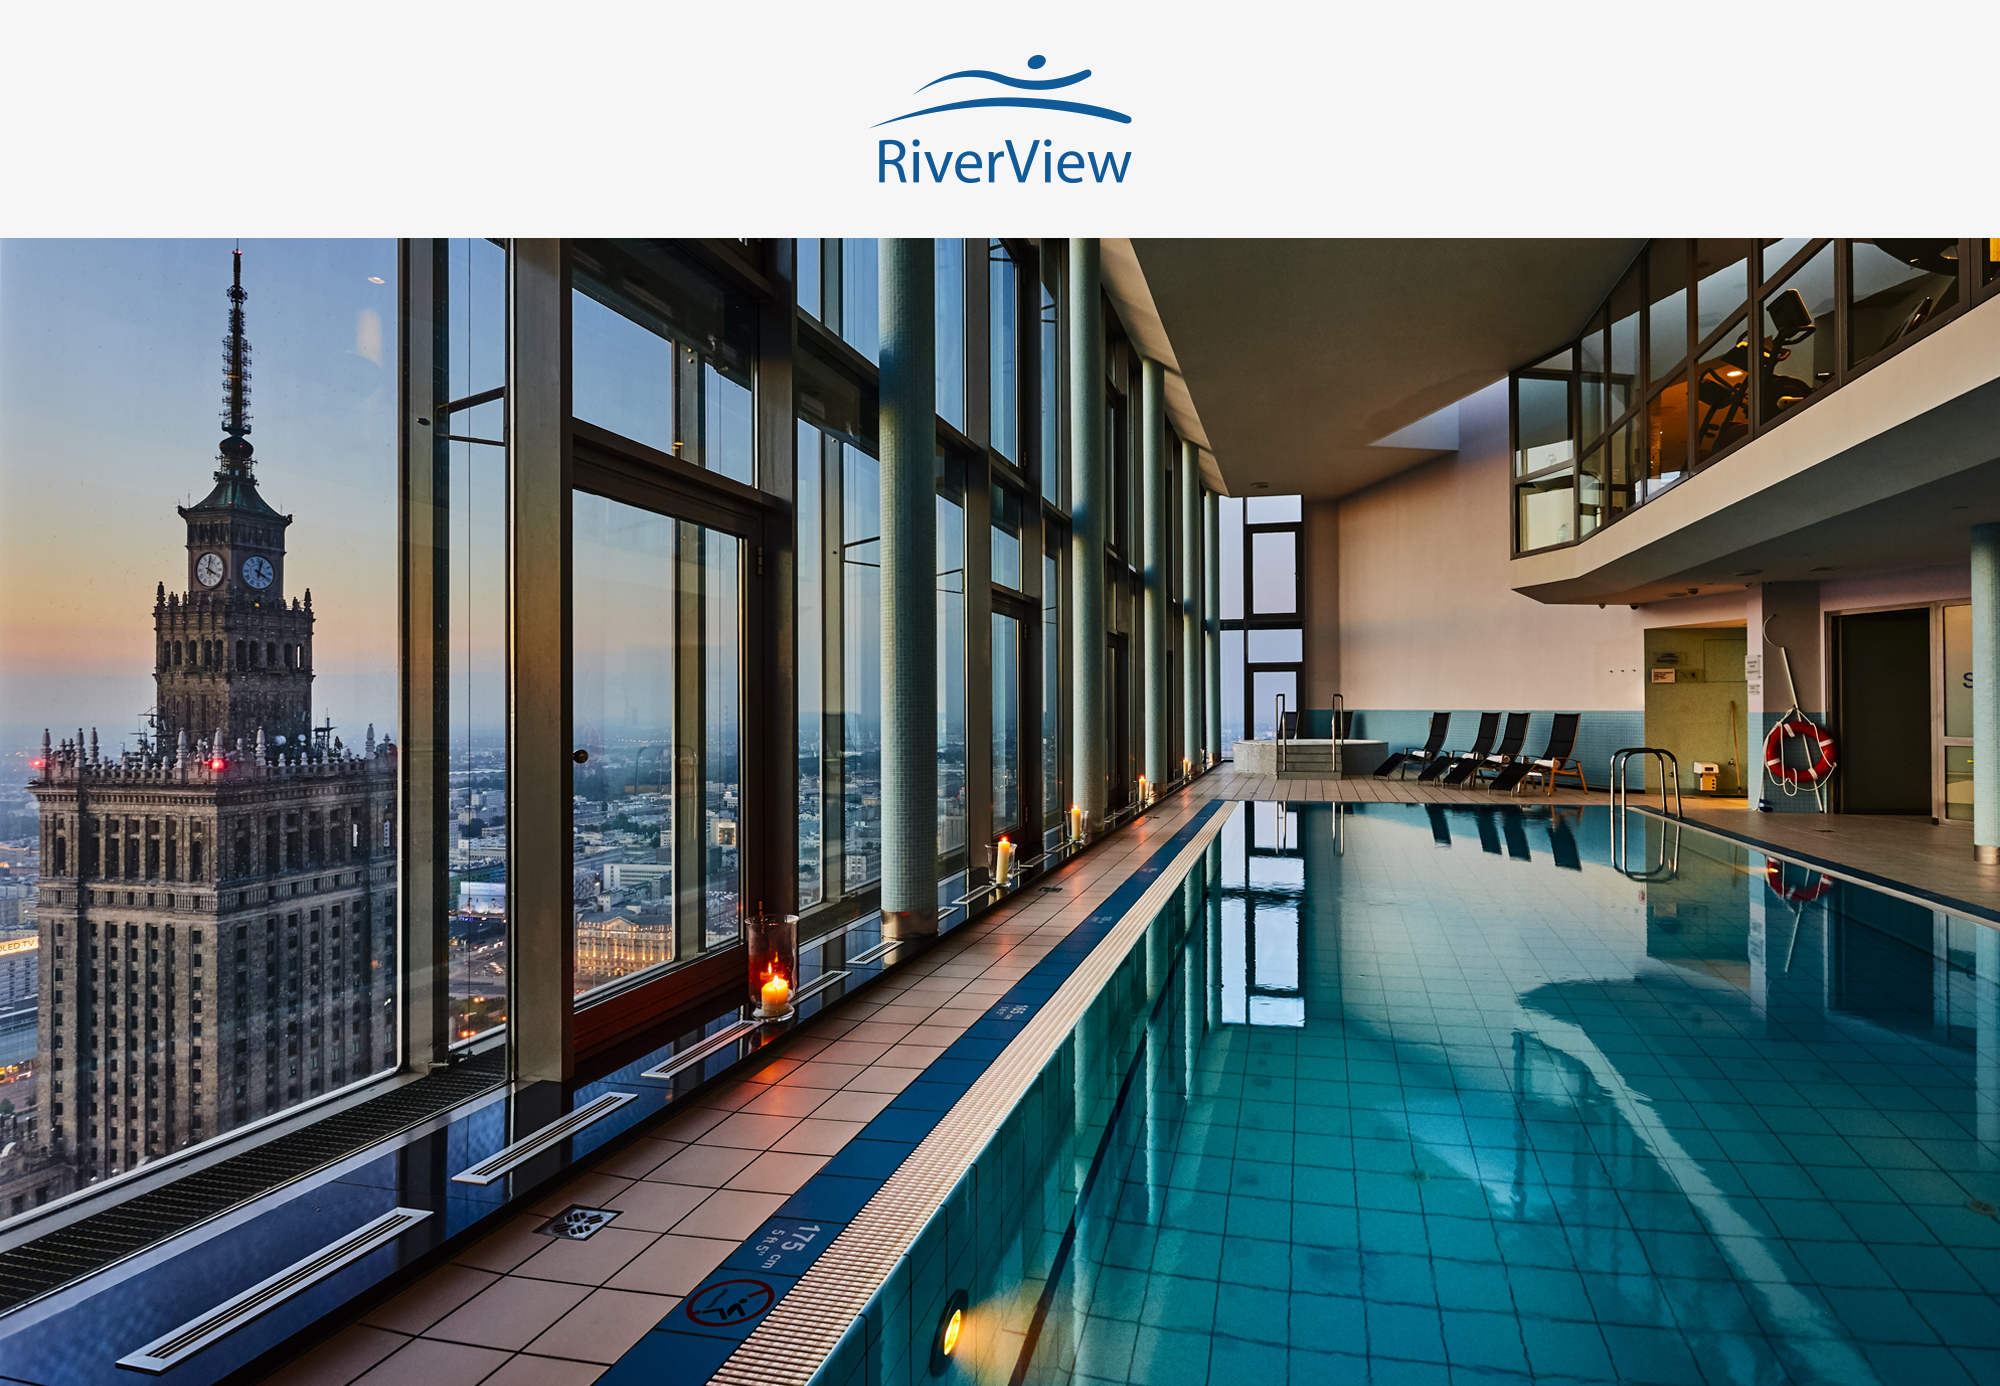 Relax at the RiverView Wellness Centre. (Monday-Sunday), one person